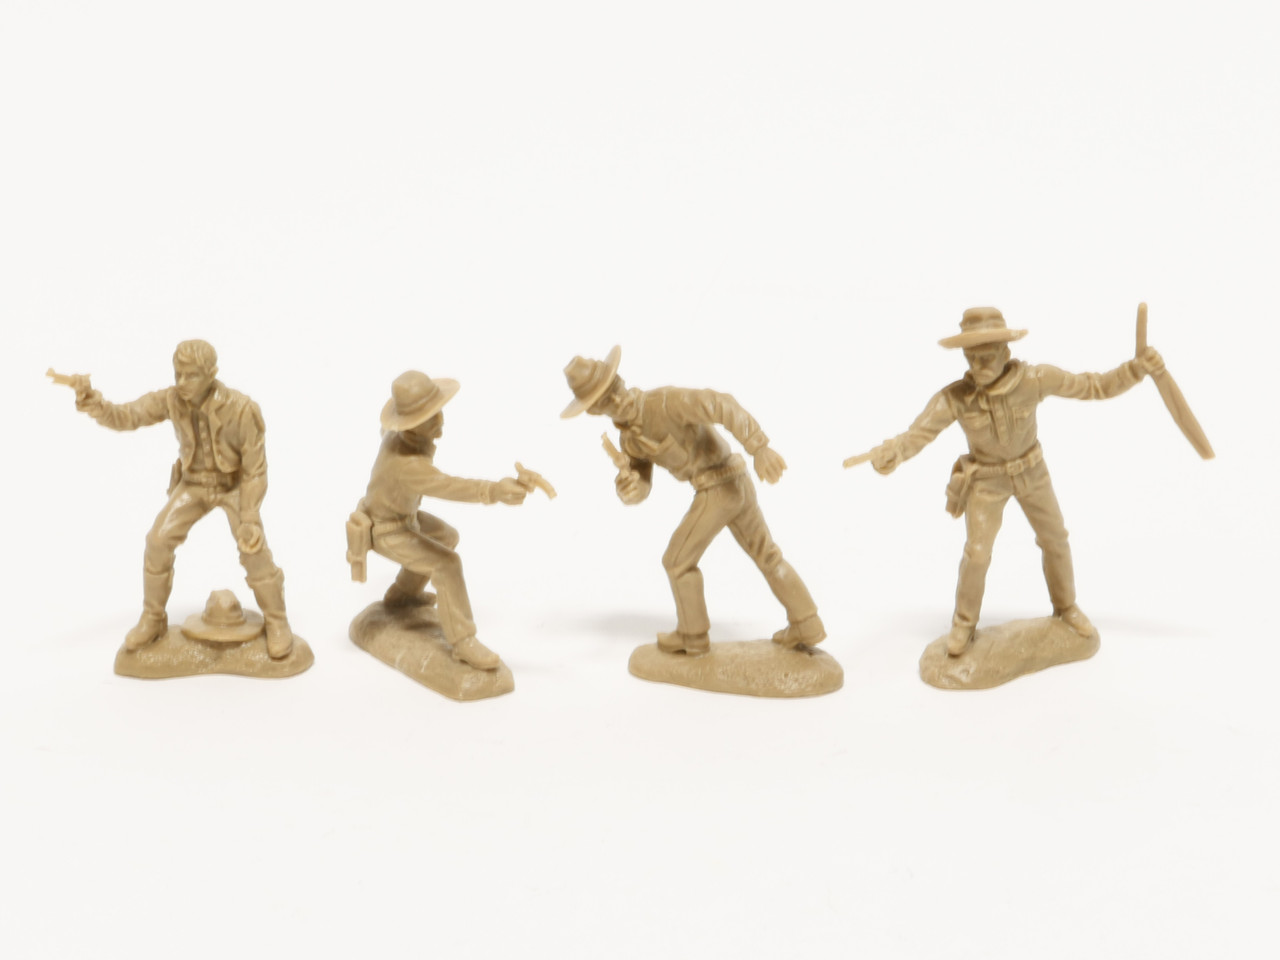 TSSD Toy Soldiers Of San Diego The Tombstone Collection